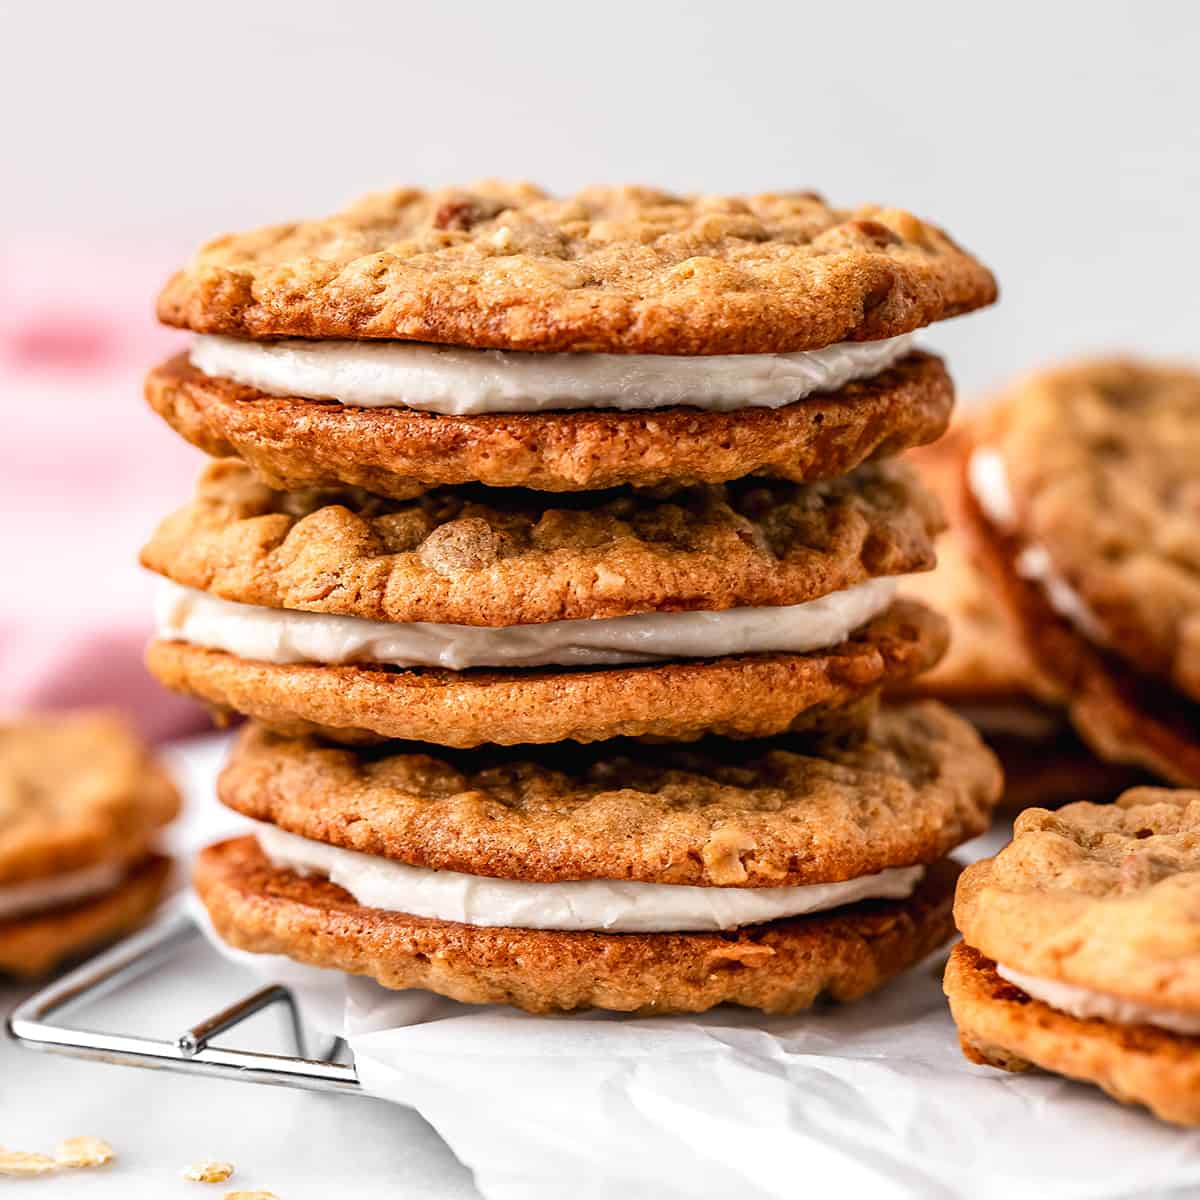 a stack of 3 homemade oatmeal cream pies